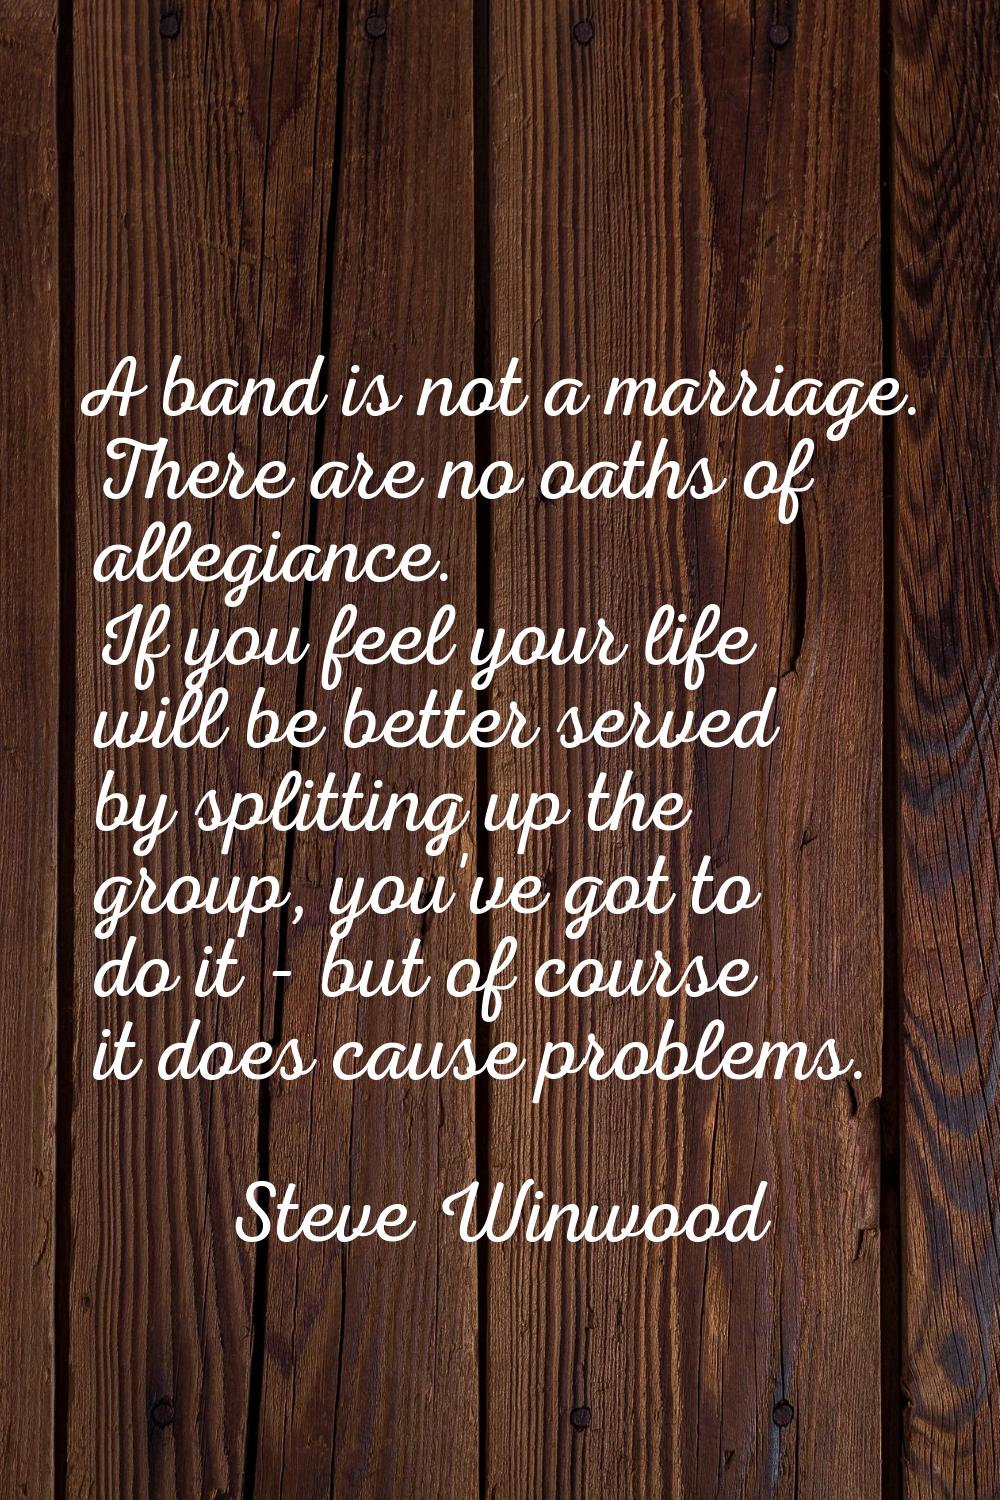 A band is not a marriage. There are no oaths of allegiance. If you feel your life will be better se